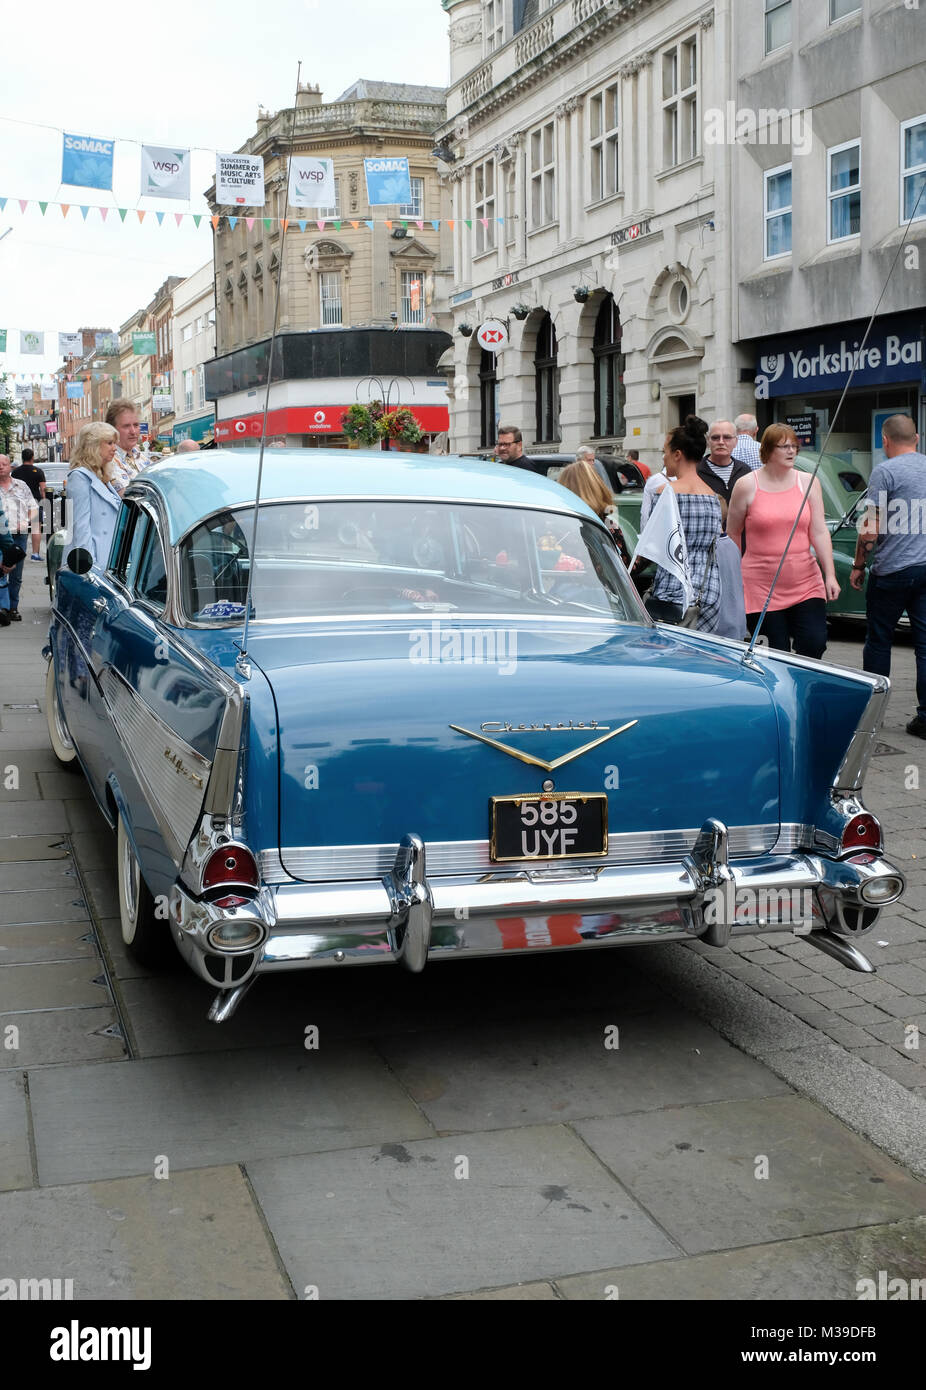 Retro Day in the streets of Gloucester. Classic motor vehicles and period costumes in Gloucester's 'gate' streets.1957 Chevrolet BelAir sedan. Stock Photo